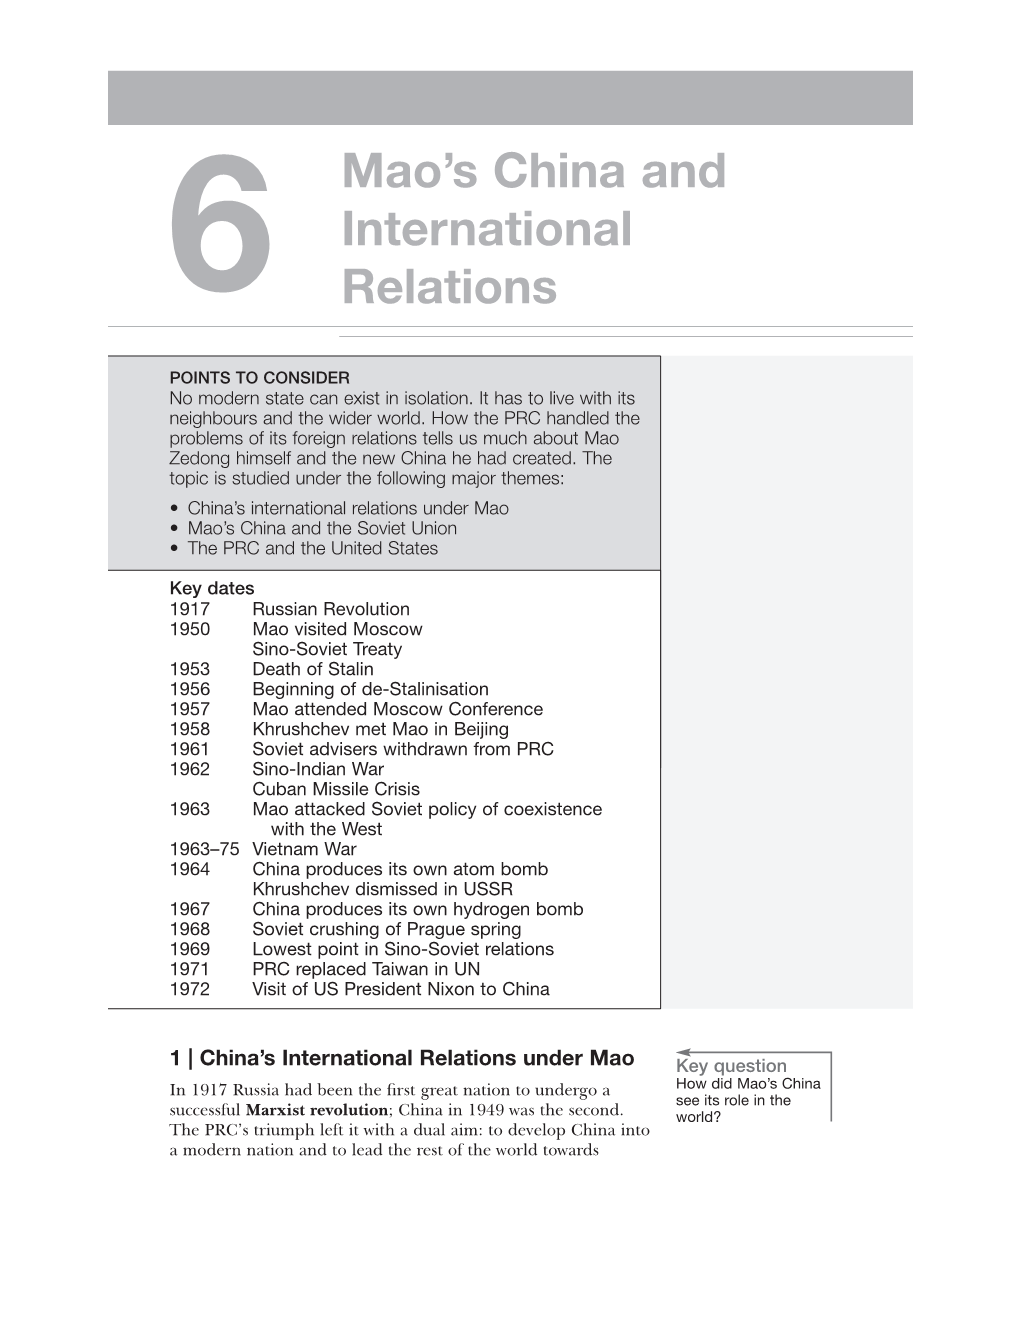 6 Mao's China and International Relations